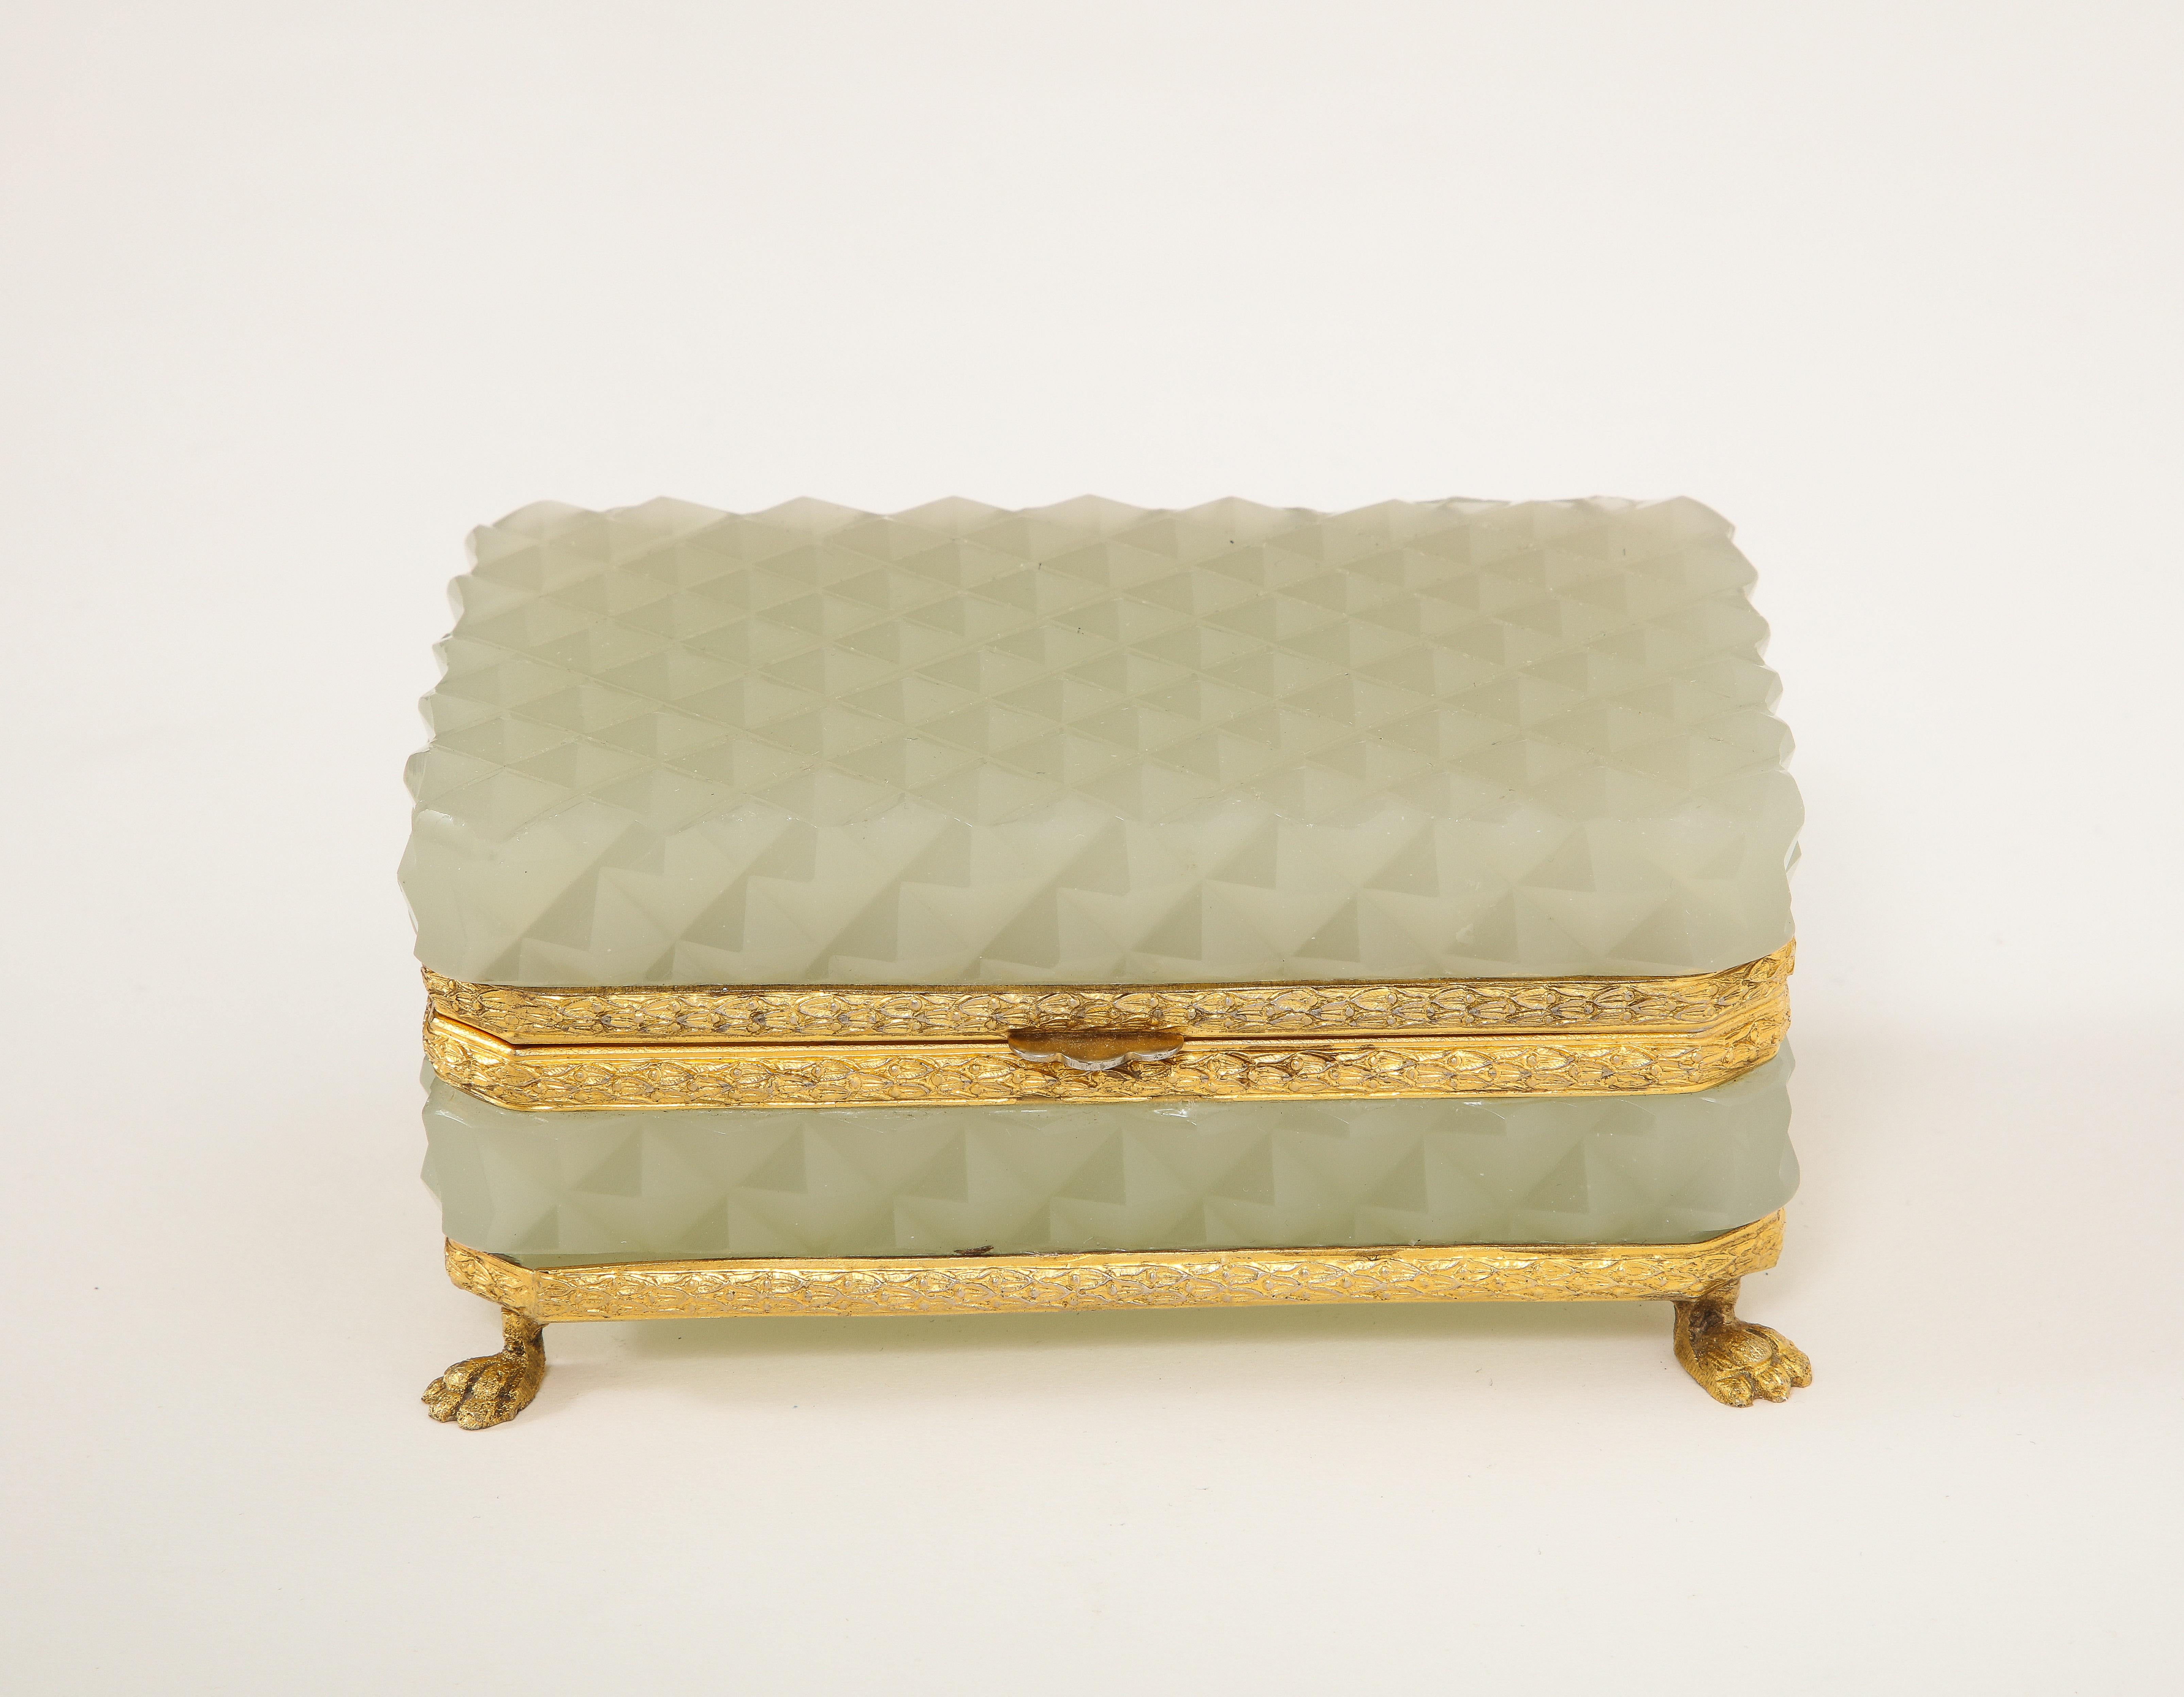 A French 19th century Louis XVI Style Ormolu Mounted and Footed Prismic Pattern Cream Opaline Crystal Box. The box is composed of two sections of French prismic pattern cream opaline crystal which are mounted to a fabulous dore bronze latch and dore